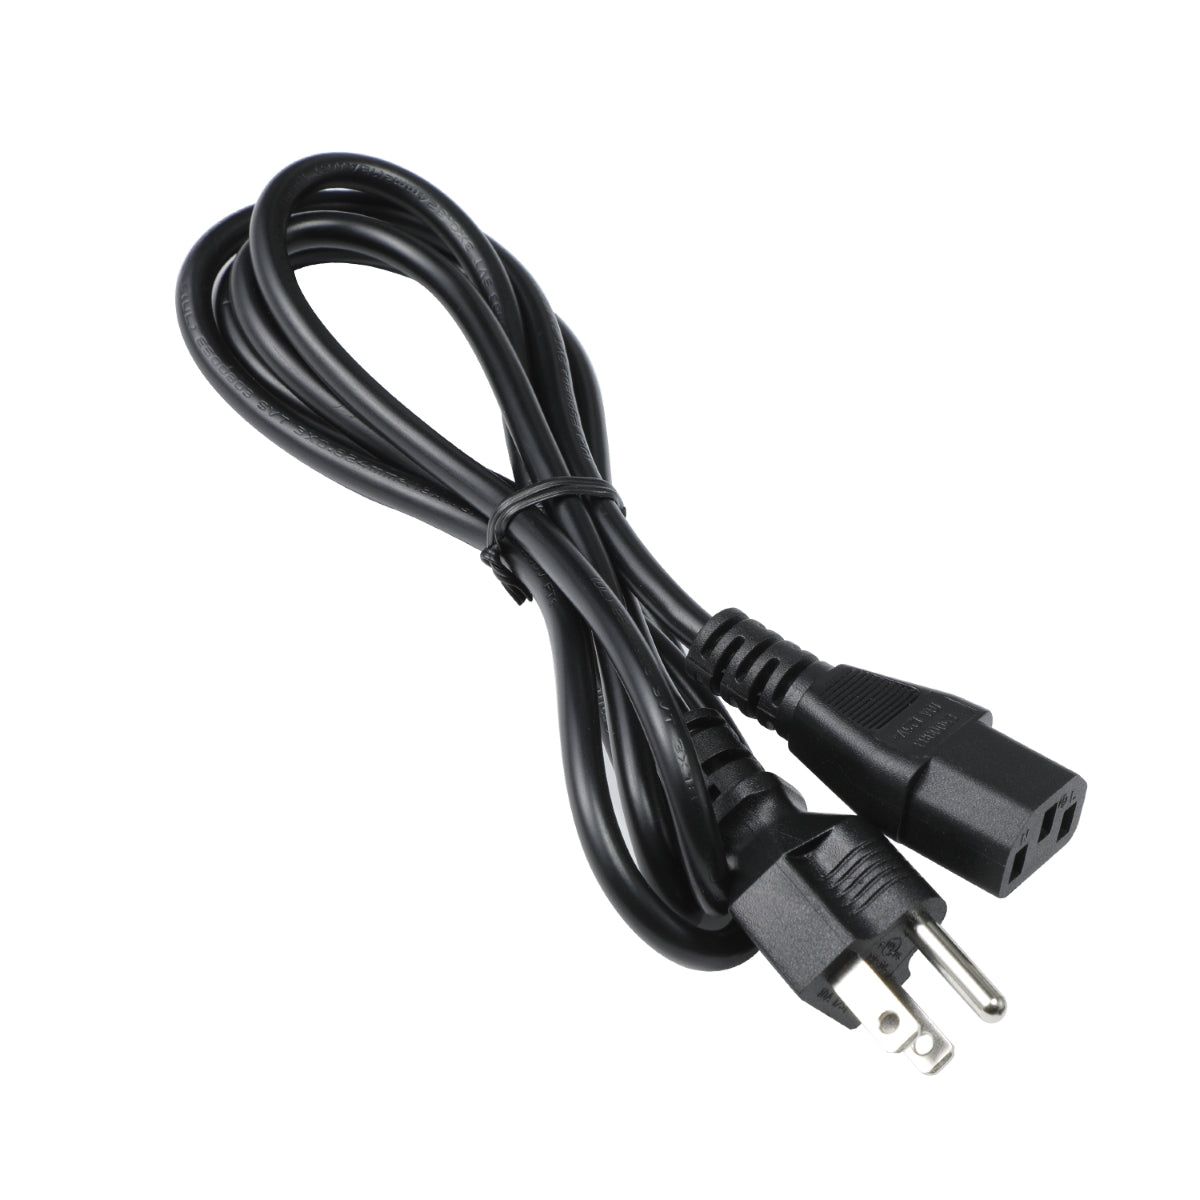 Power Cord for Dell U4919DW Display Monitor